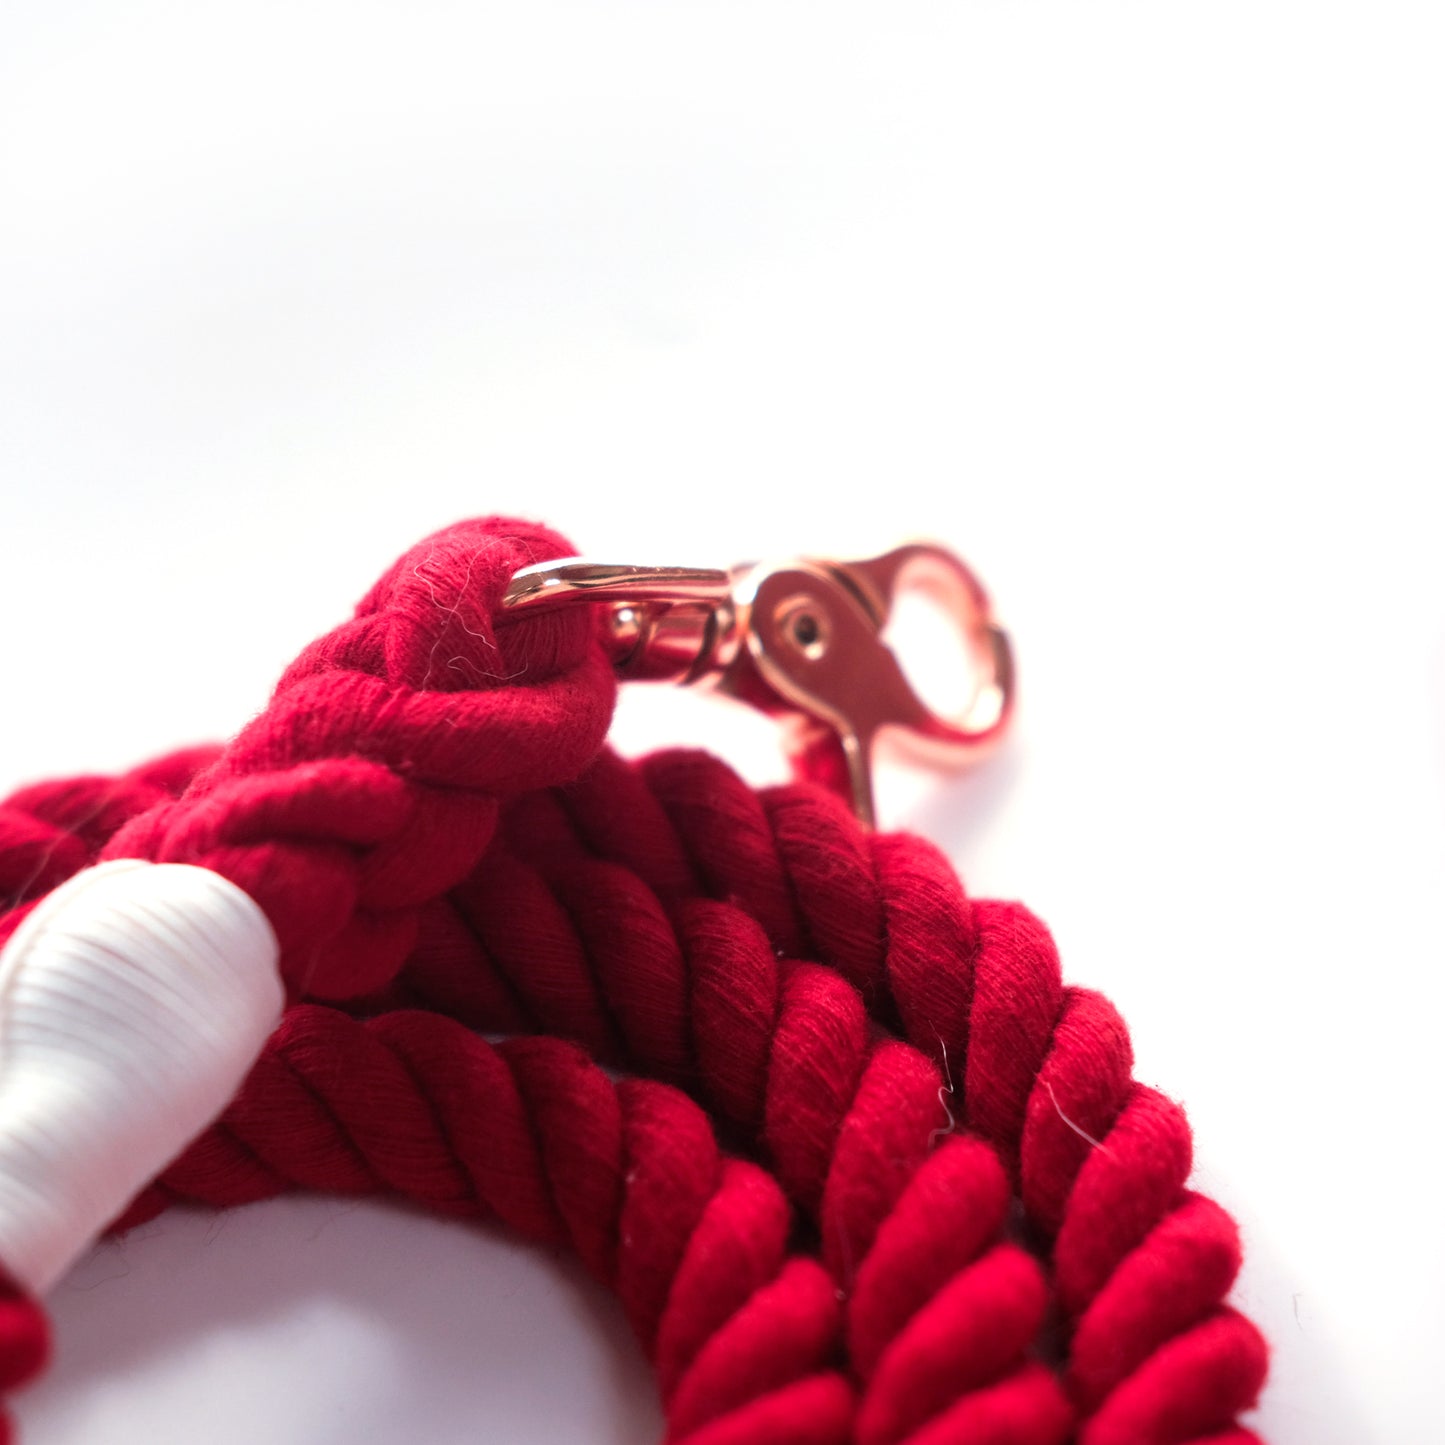 Blood Red Cotton Rope Leash